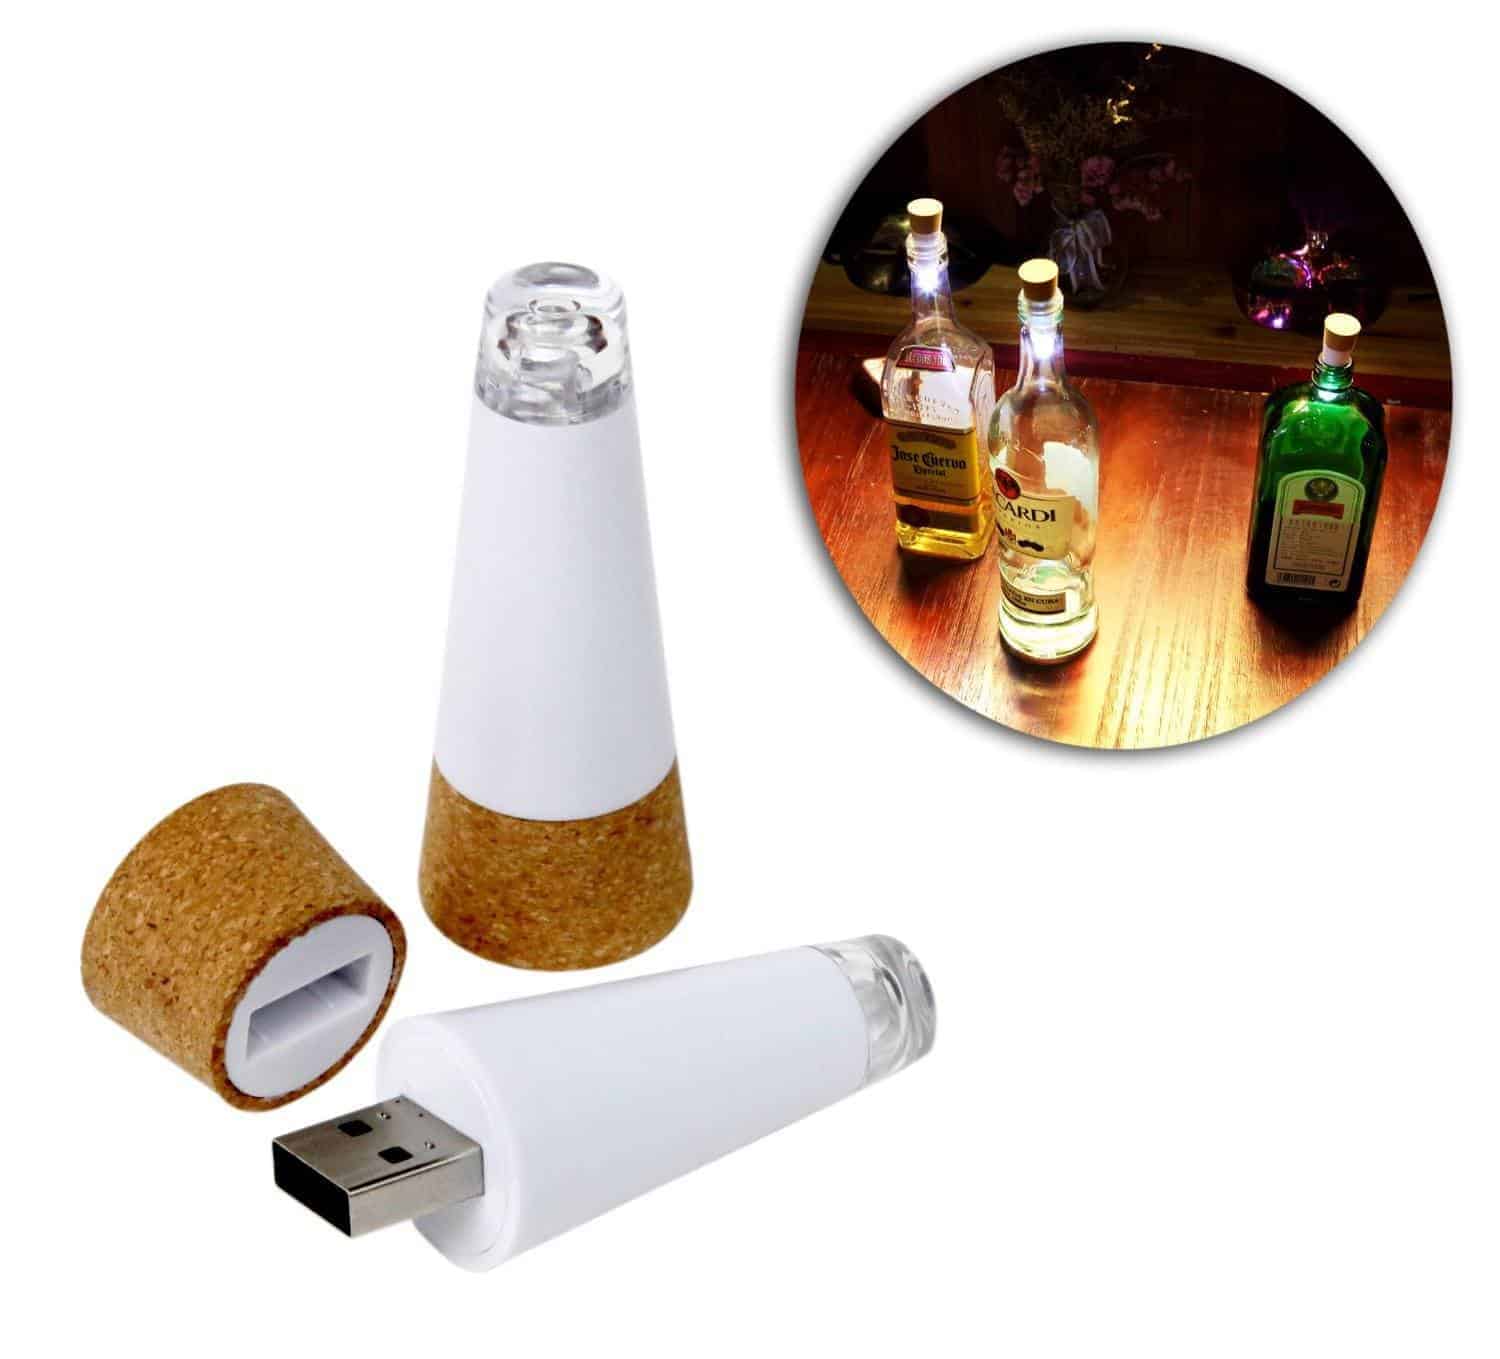 Foryee LED wine stopper